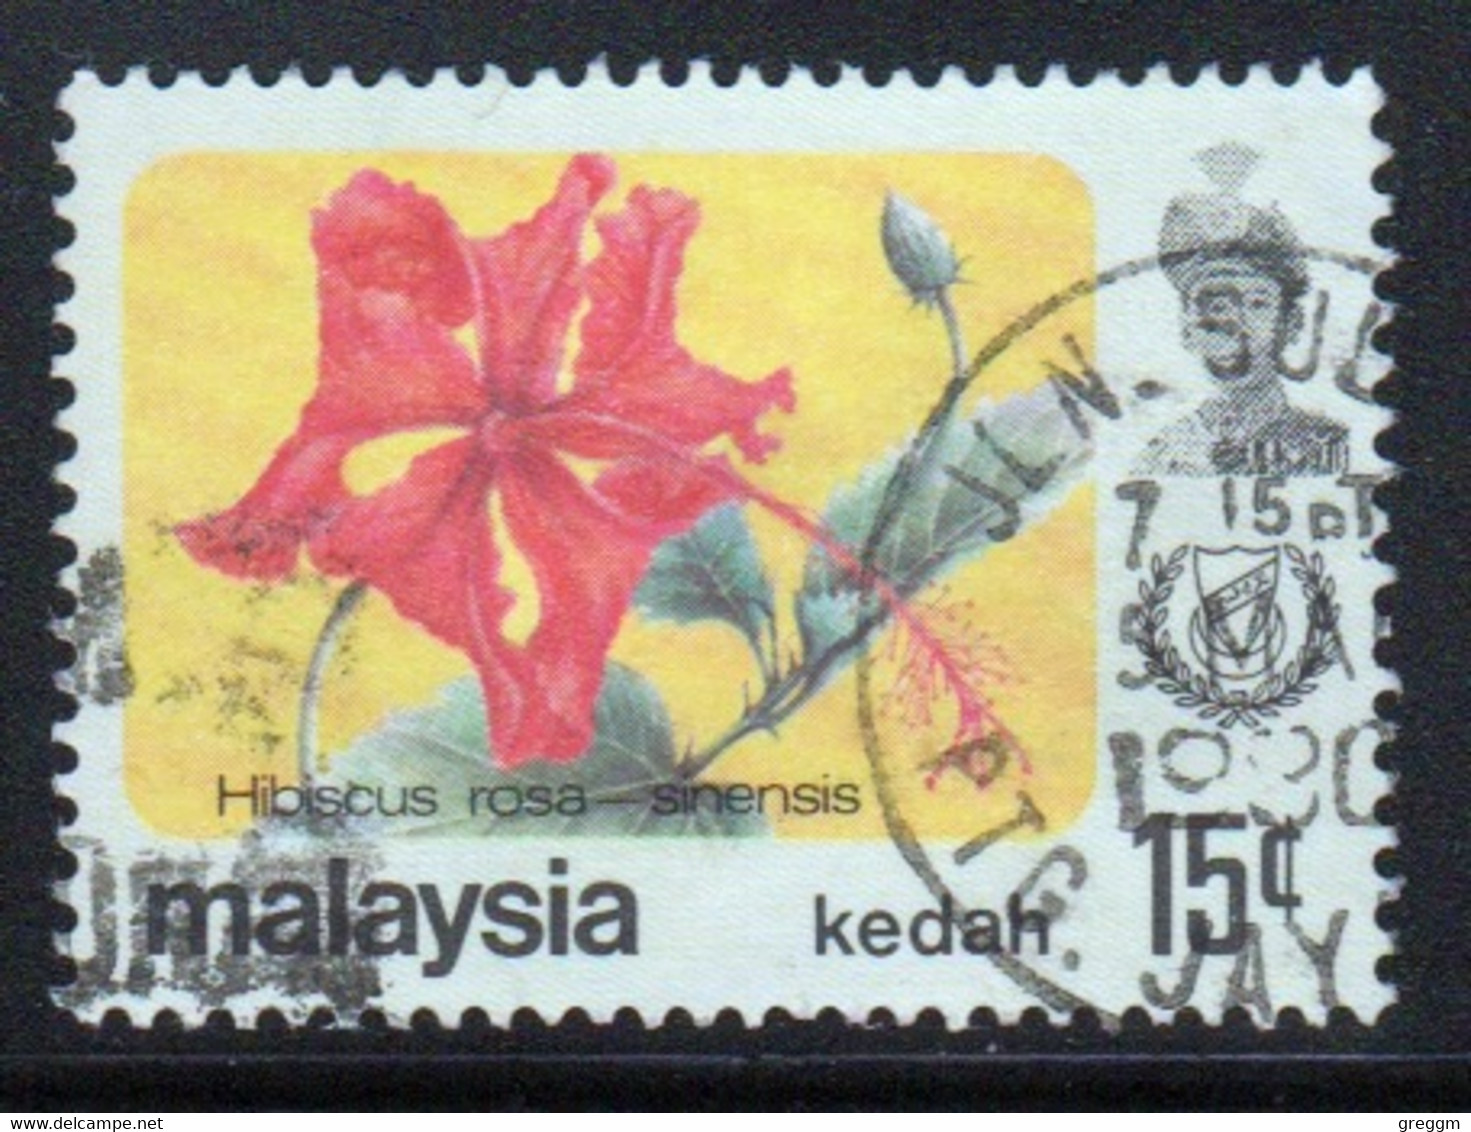 Malaysia Kedah 1979 Single 15c Commemorative Stamp Which Is I Believe Cat No 139 In Fine Used - Kedah